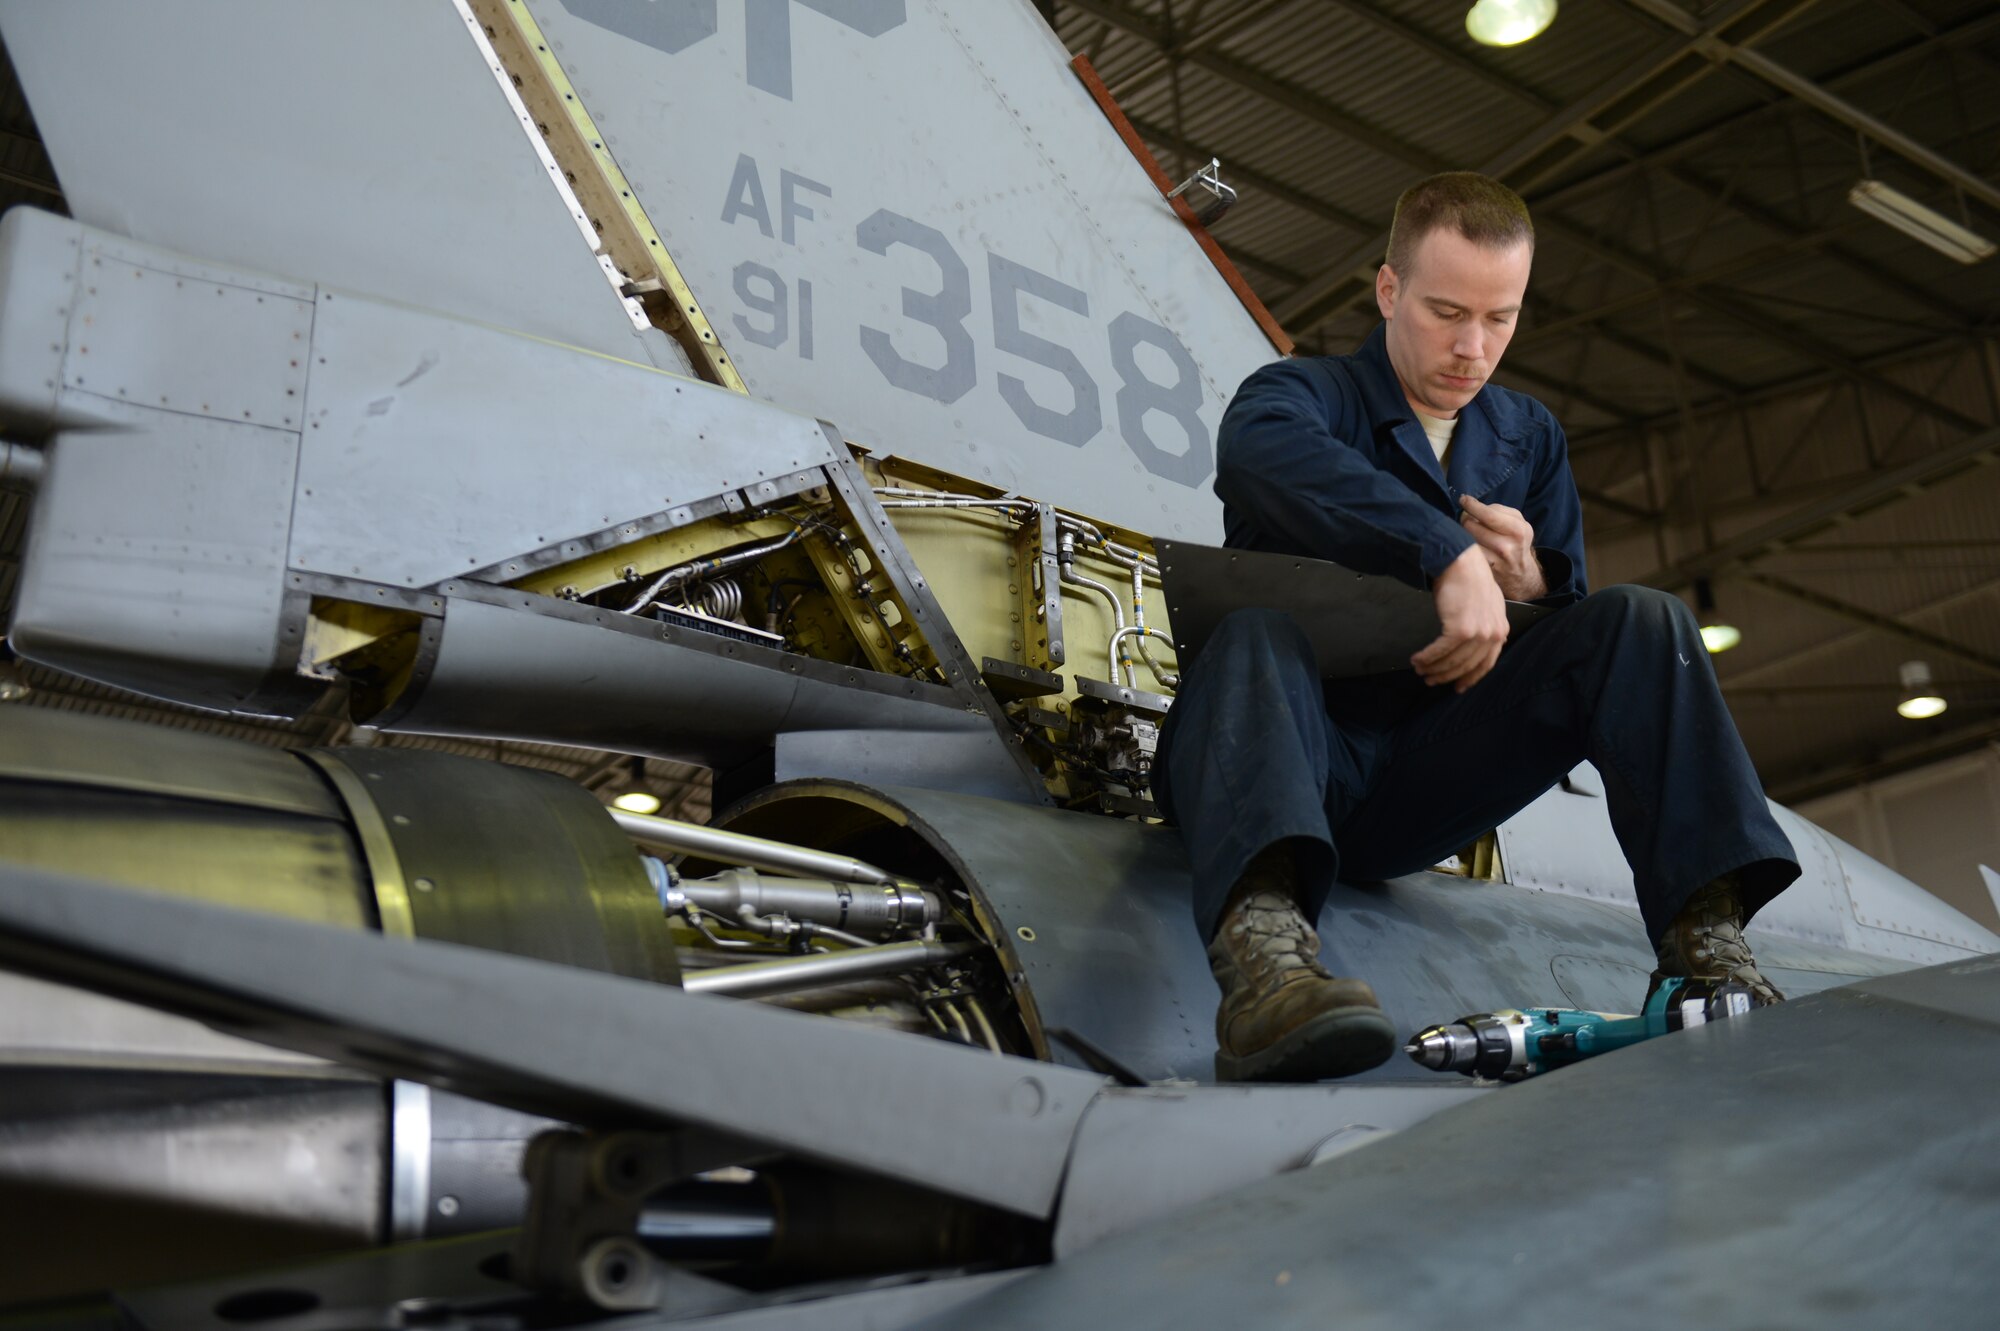 SPANGDAHLEM AIR BASE, Germany – U.S. Air Force Senior Airman Todd Hughes, 52nd Equipment Maintenance Squadron inspection team member from Williamsport, Pa., places rivets on a U.S. Air Force F-16 Fighting Falcon fighter aircraft panel March 27, 2013. Technicians remove the panels to reveal the aircraft’s internal workings prior to beginning an inspection. (U.S. Air Force photo by Airman 1st Class Gustavo Castillo/Released)